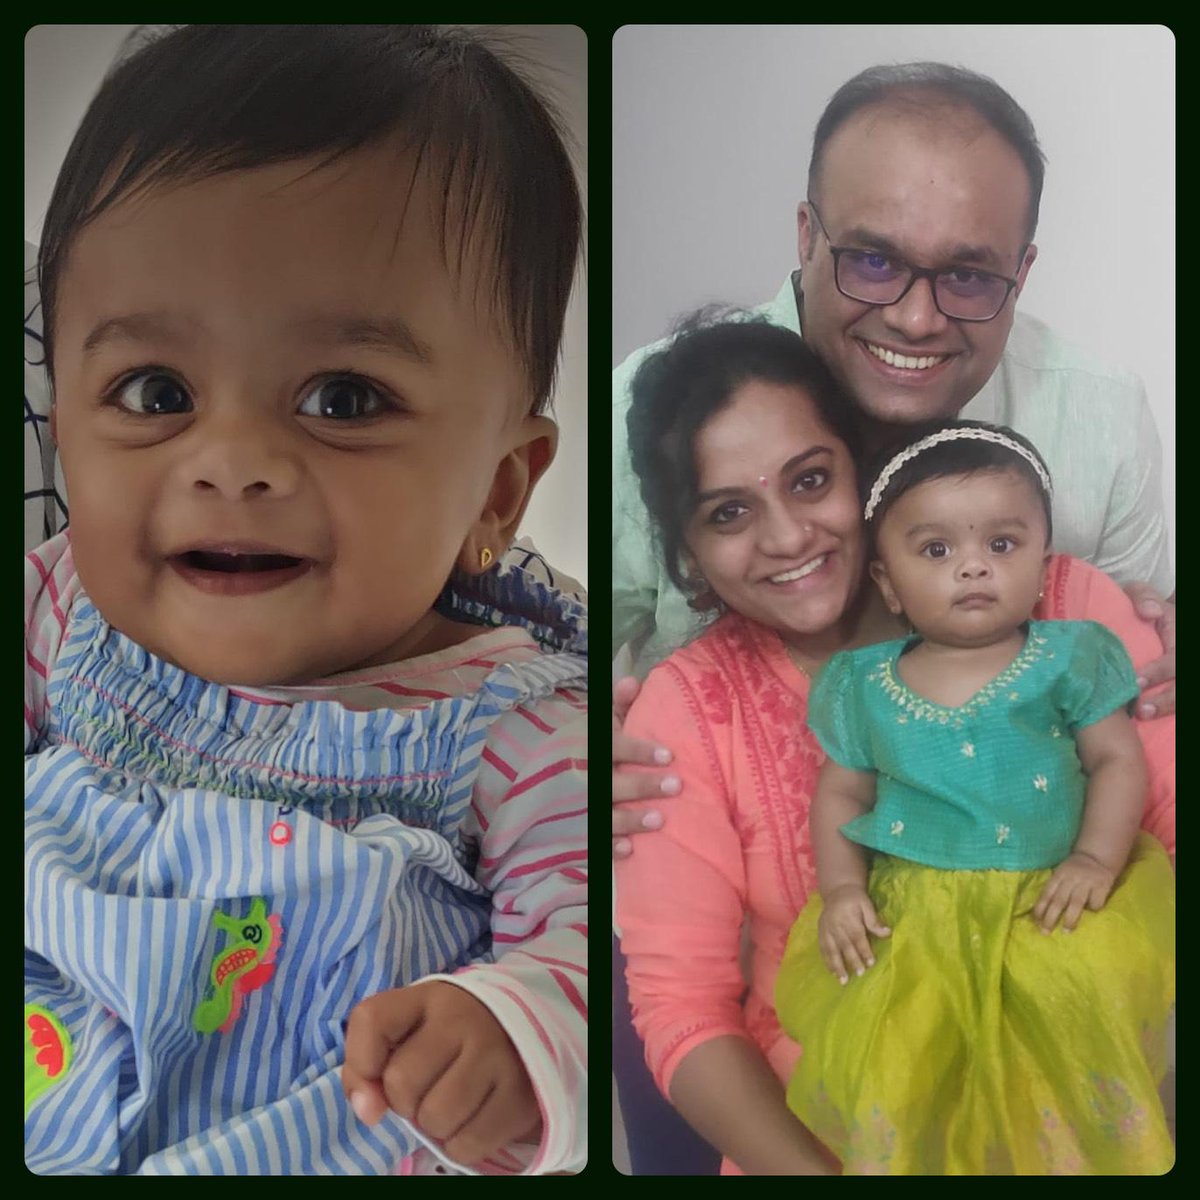 This happy cherubic baby is 10-month old Diya Nandagopal who is battling Spinal Muscular Atrophy (SMA) type 2, a rare debilitating disease. Her best hope is the gene-therapy cure - Zolgensma, by Novartis which costs Rs.16 Crores. Pls help if you can impactguru.com/fundraiser/hel…